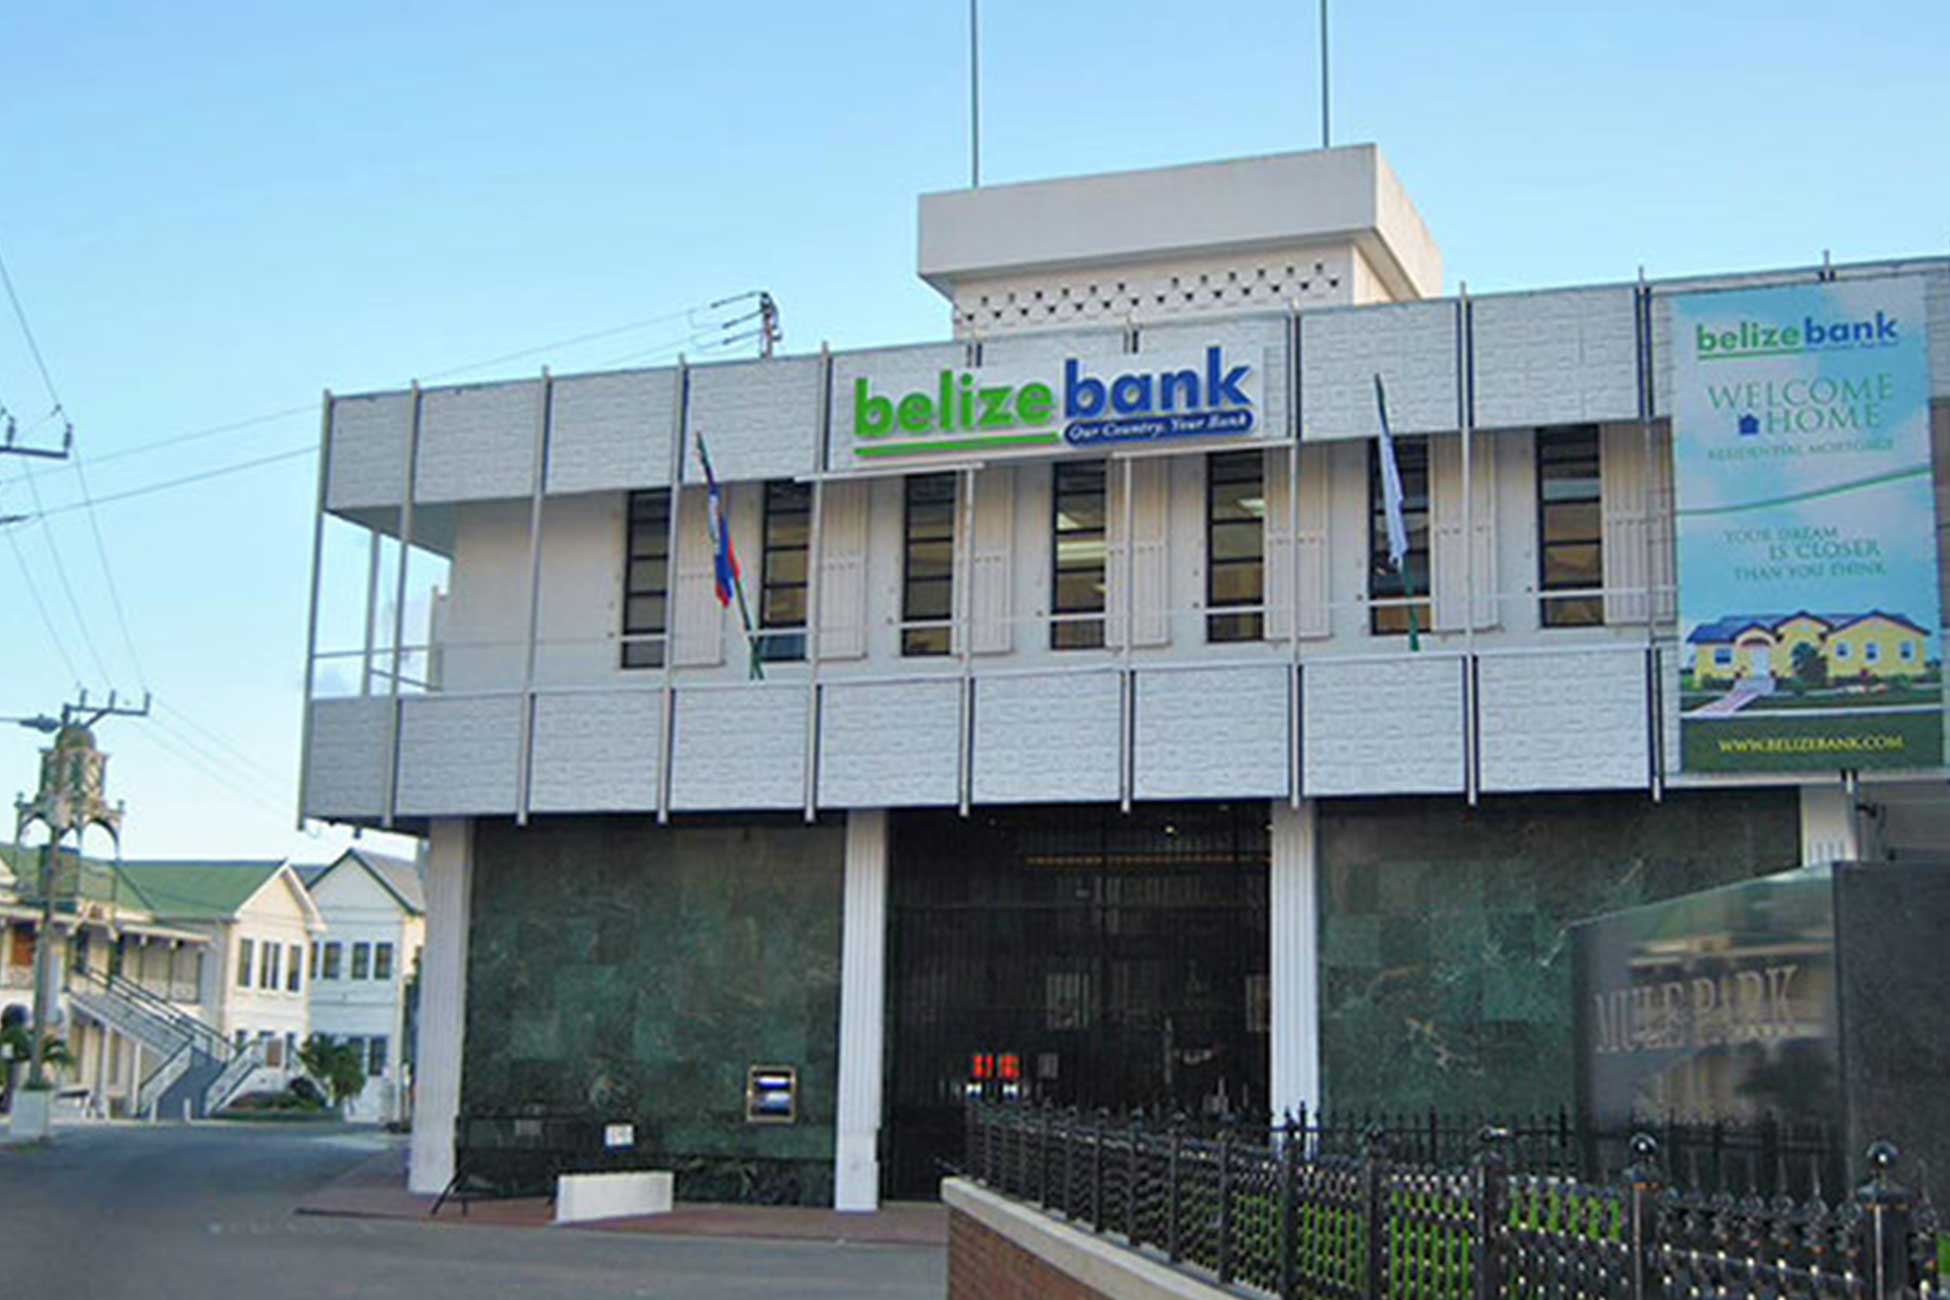 Open a bank account in Belize